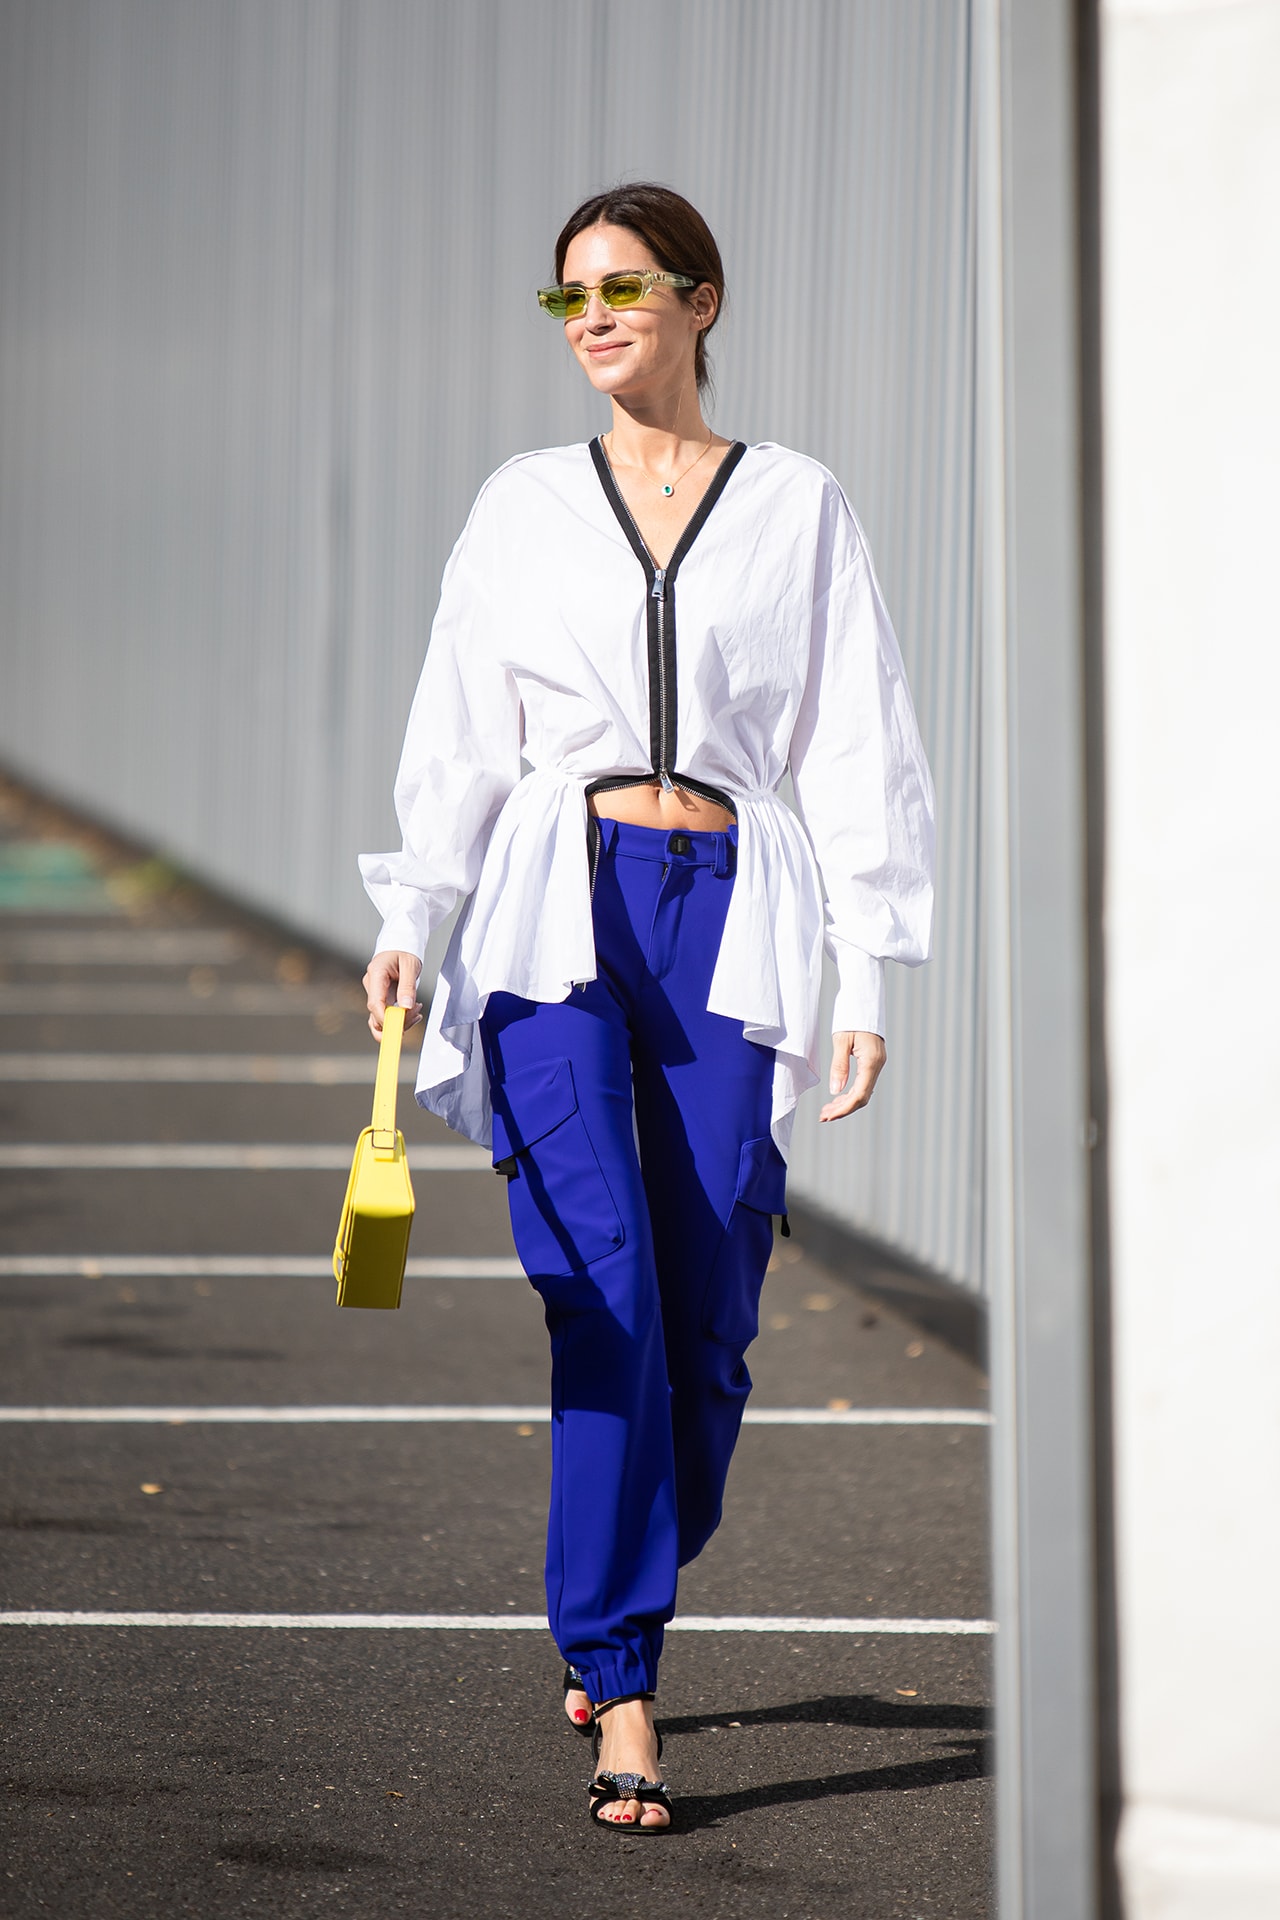 Paris Fashion Week Spring Summer 2022 SS22 Street Style Look Outfit Influencer White Top Blue Pants